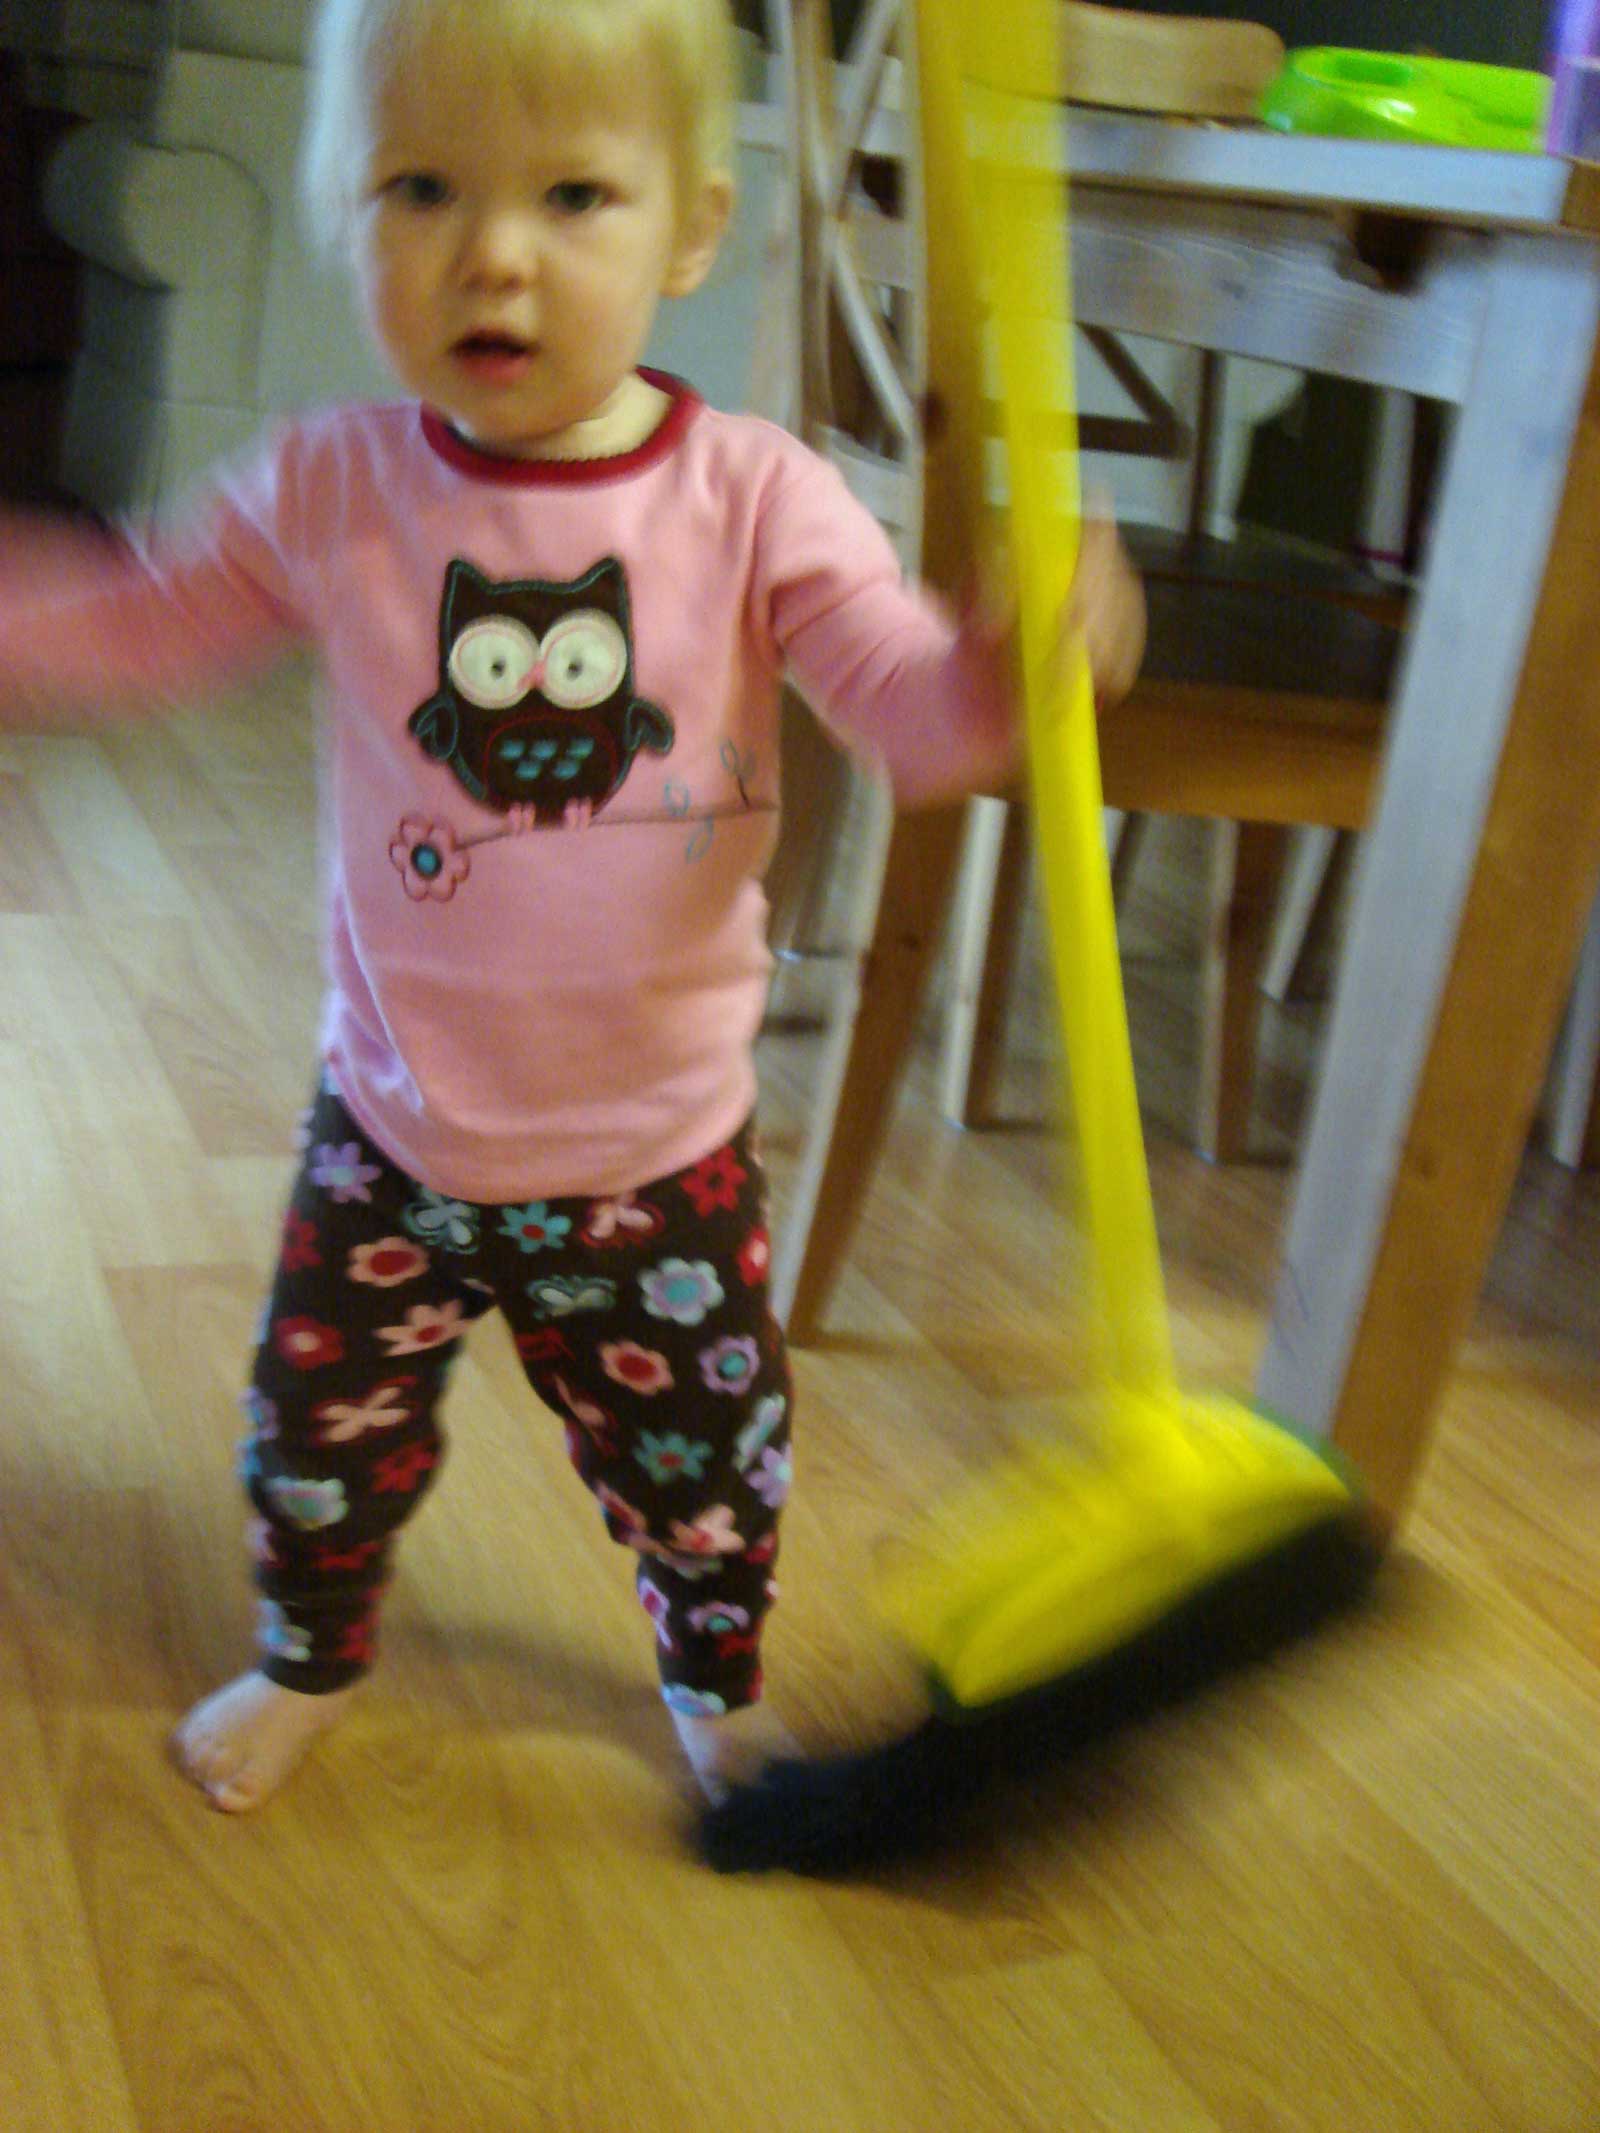 Emily with the broom